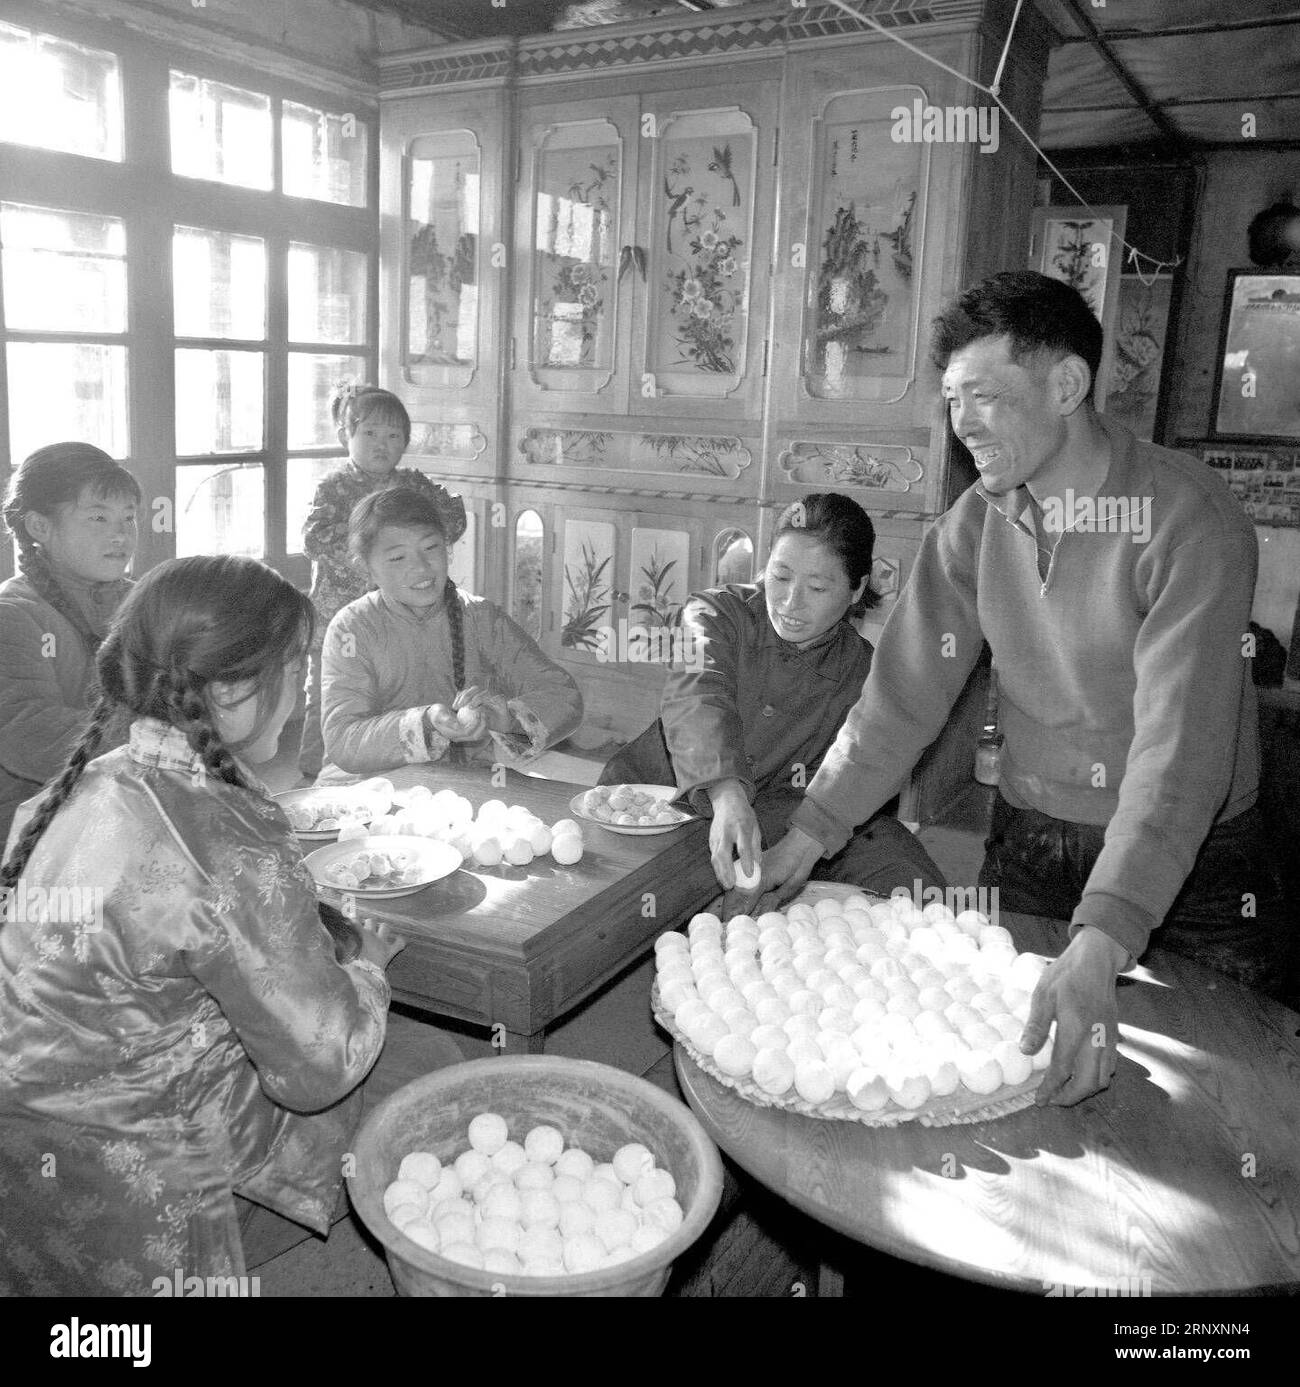 (180207) -- BEIJING, Feb. 7, 2018 -- File photo taken in February, 1980 shows a family cooking niandoubao , a kind of steamed bun stuffed with sweetened bean paste, in Hailun County, northeast China s Heilongjiang Province. According to traditional cultural elements and customs, some indispensable dishes carrying symbolic meanings are served during the Spring Festival. They are ceremonious processes and sweet memories for those who live and work away from home. Spring Festival, or better known as Chinese Lunar New Year, is the most important festival for all Chinese, which has a history of mor Stock Photo